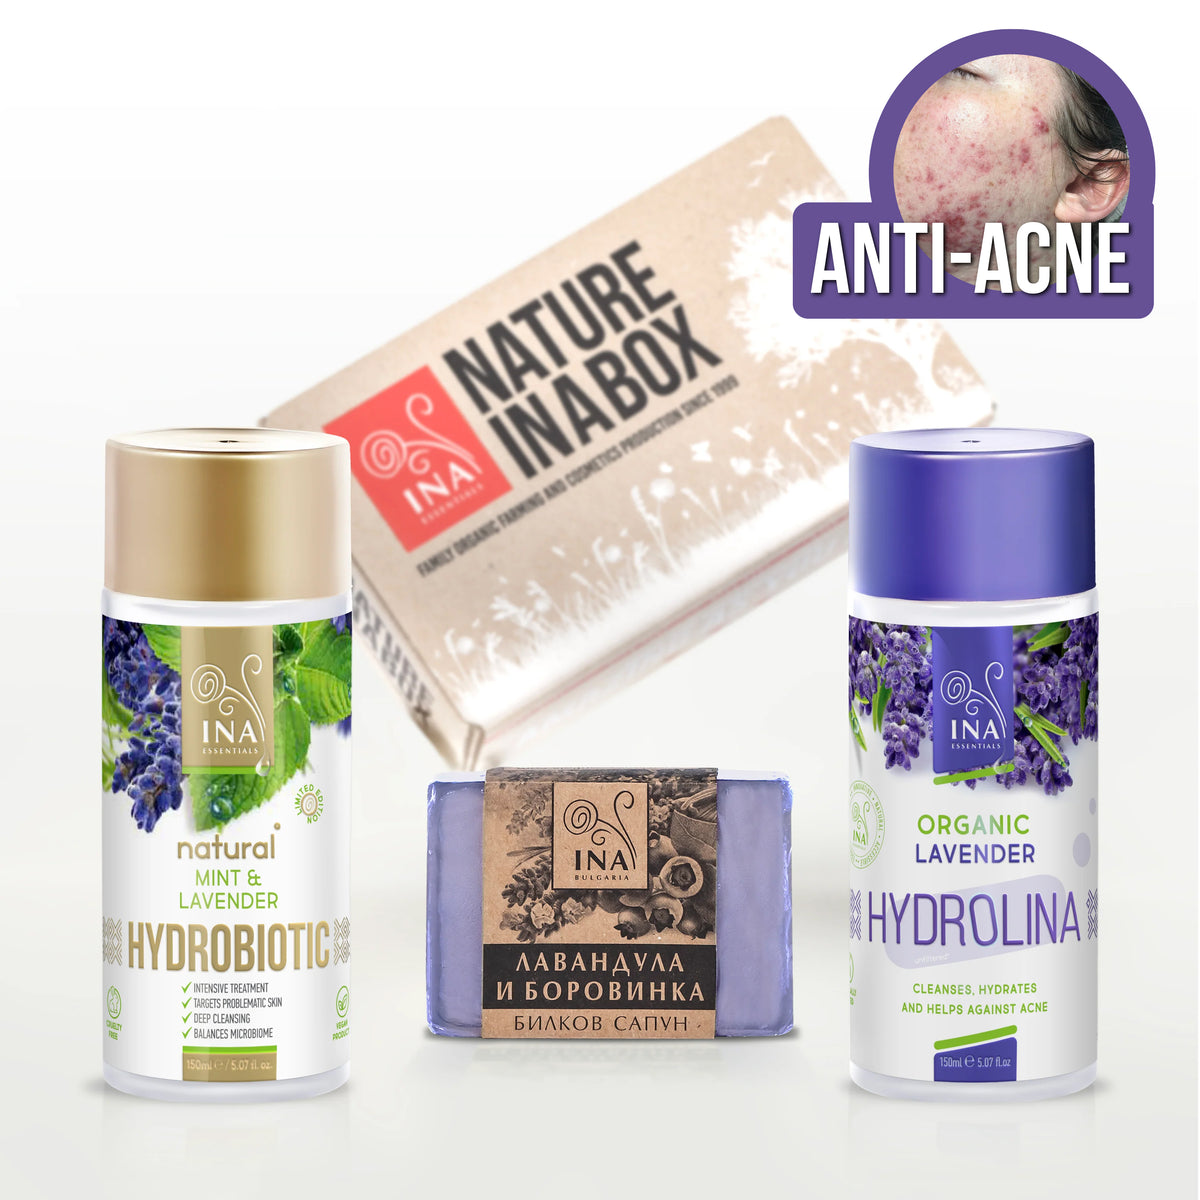 Acne RoutINA™ - lasting solution for Acne and Blackheads